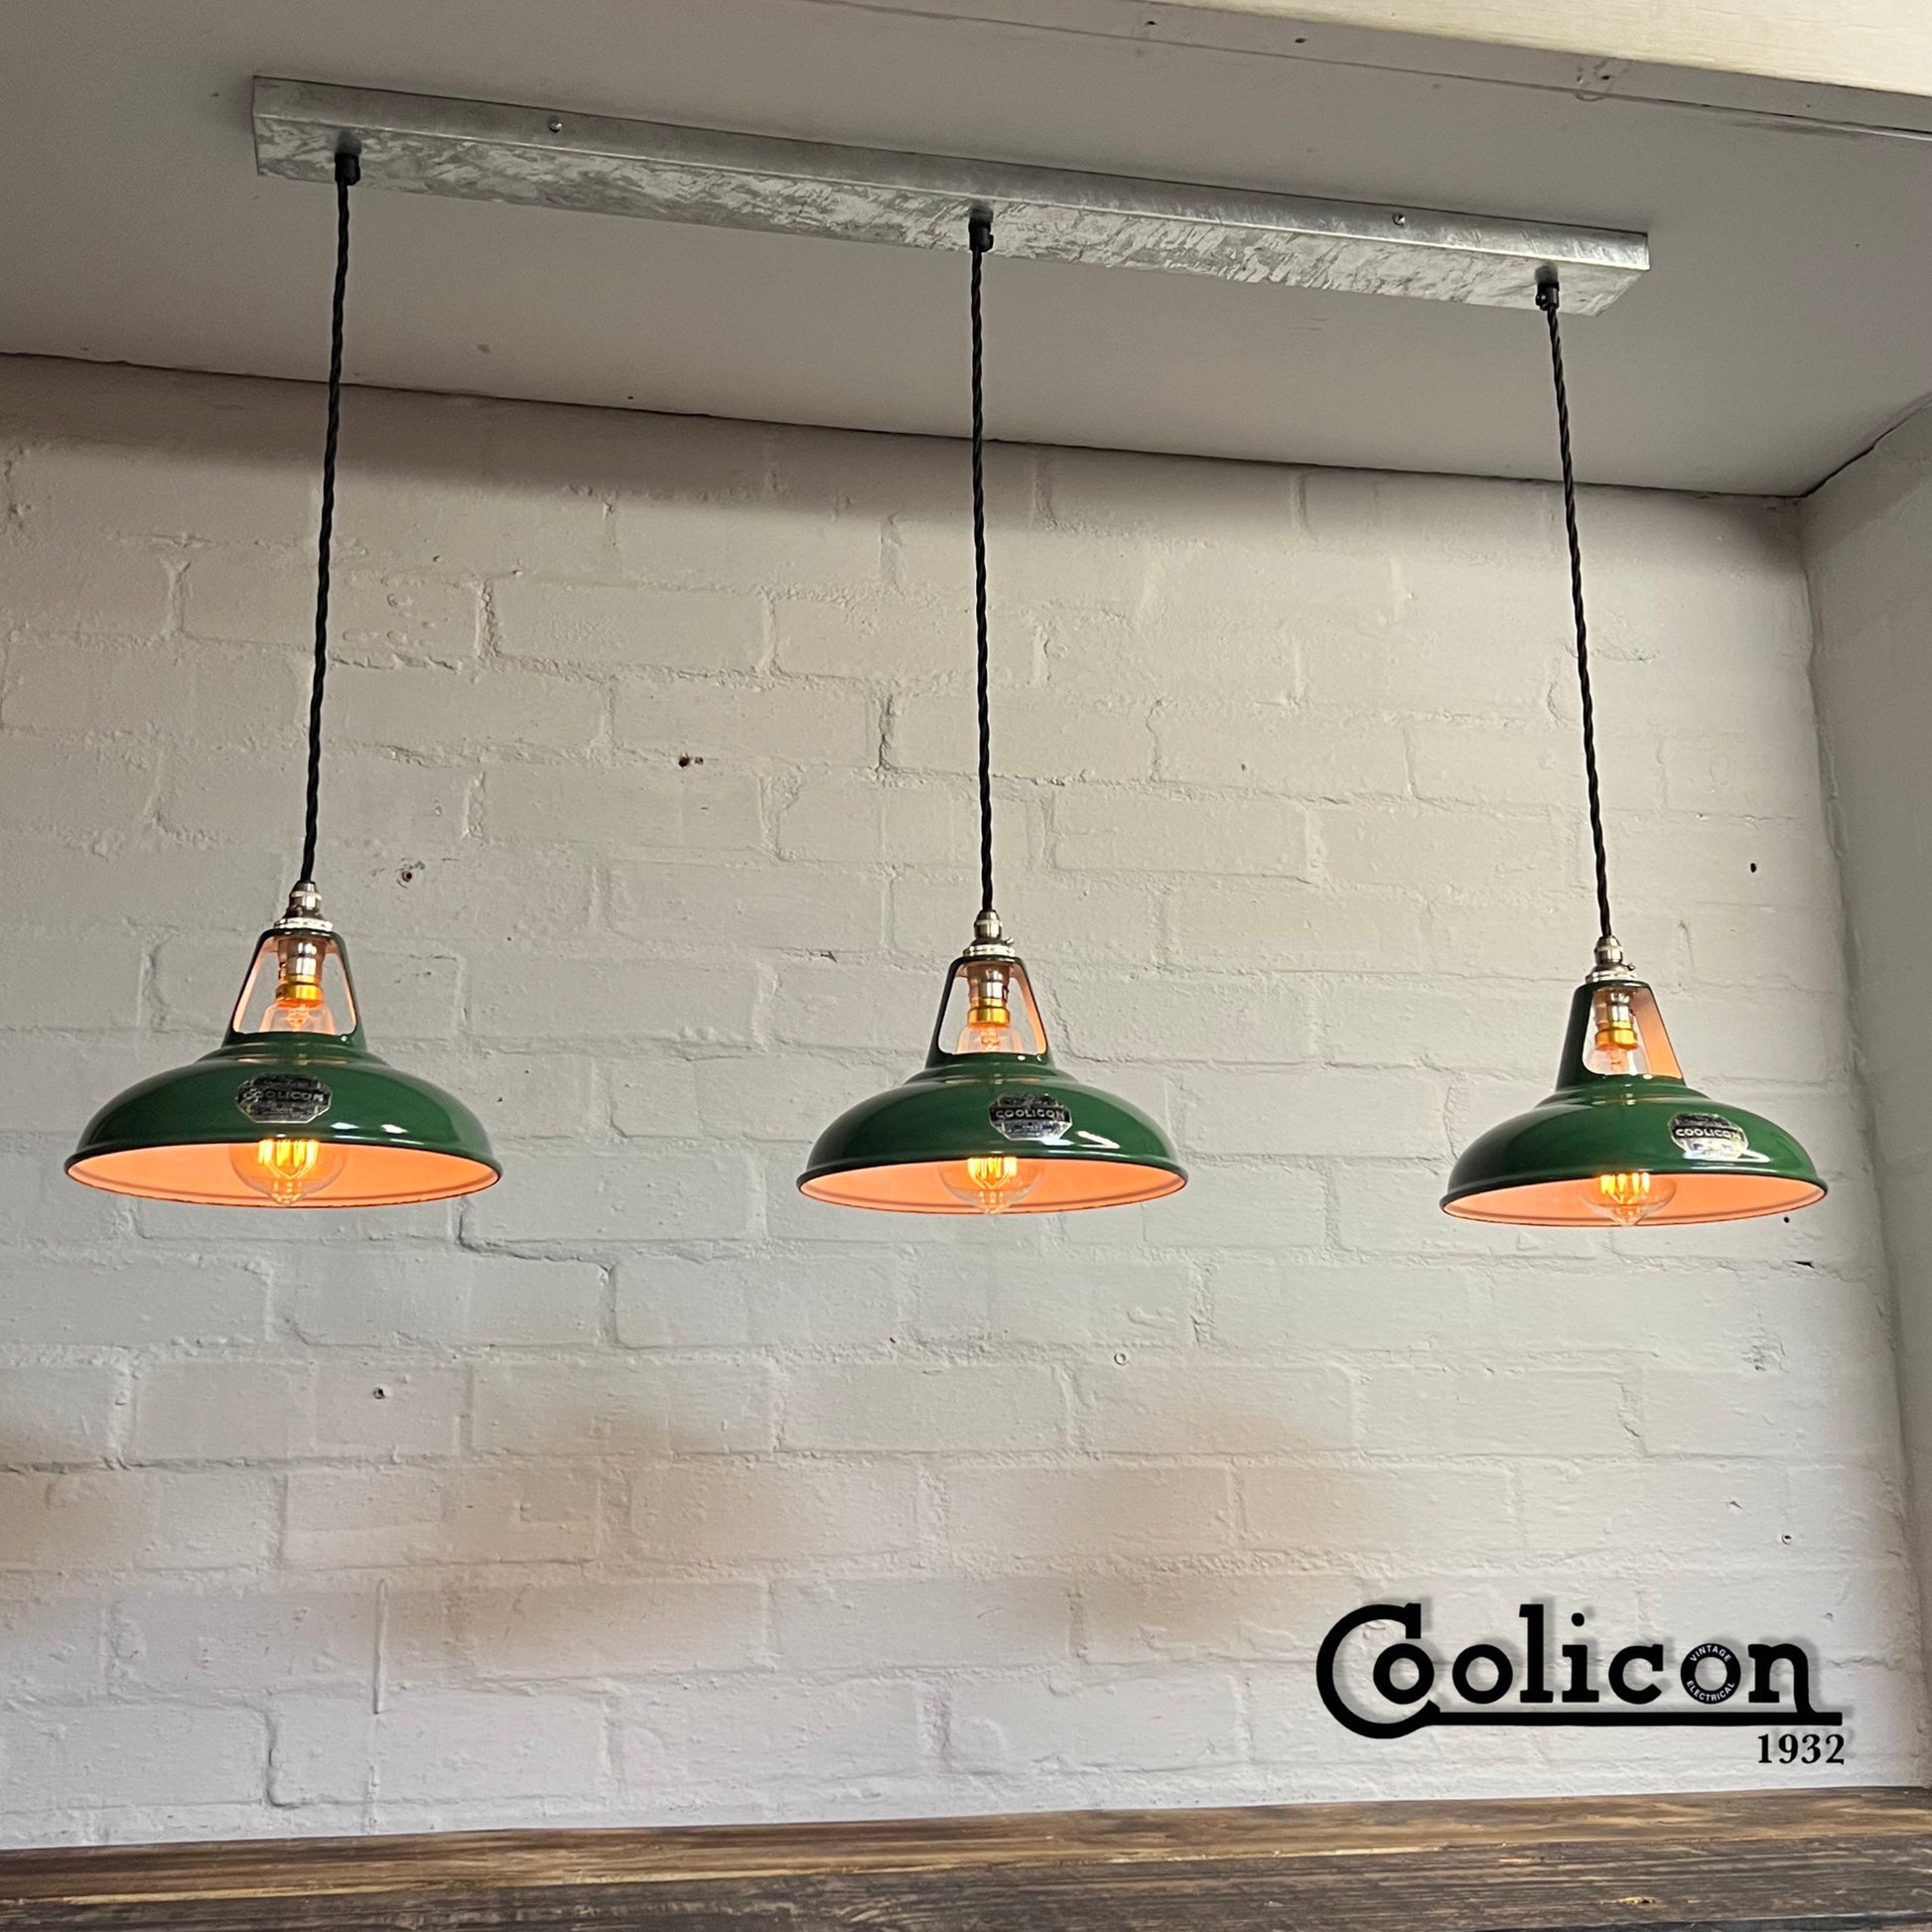 Cawston ~ 3 x Genuine Antique Coolicon Solid Shade 1932 Design Pendant Set Galvanised Track Light | Dining Room | Kitchen Table | Vintage